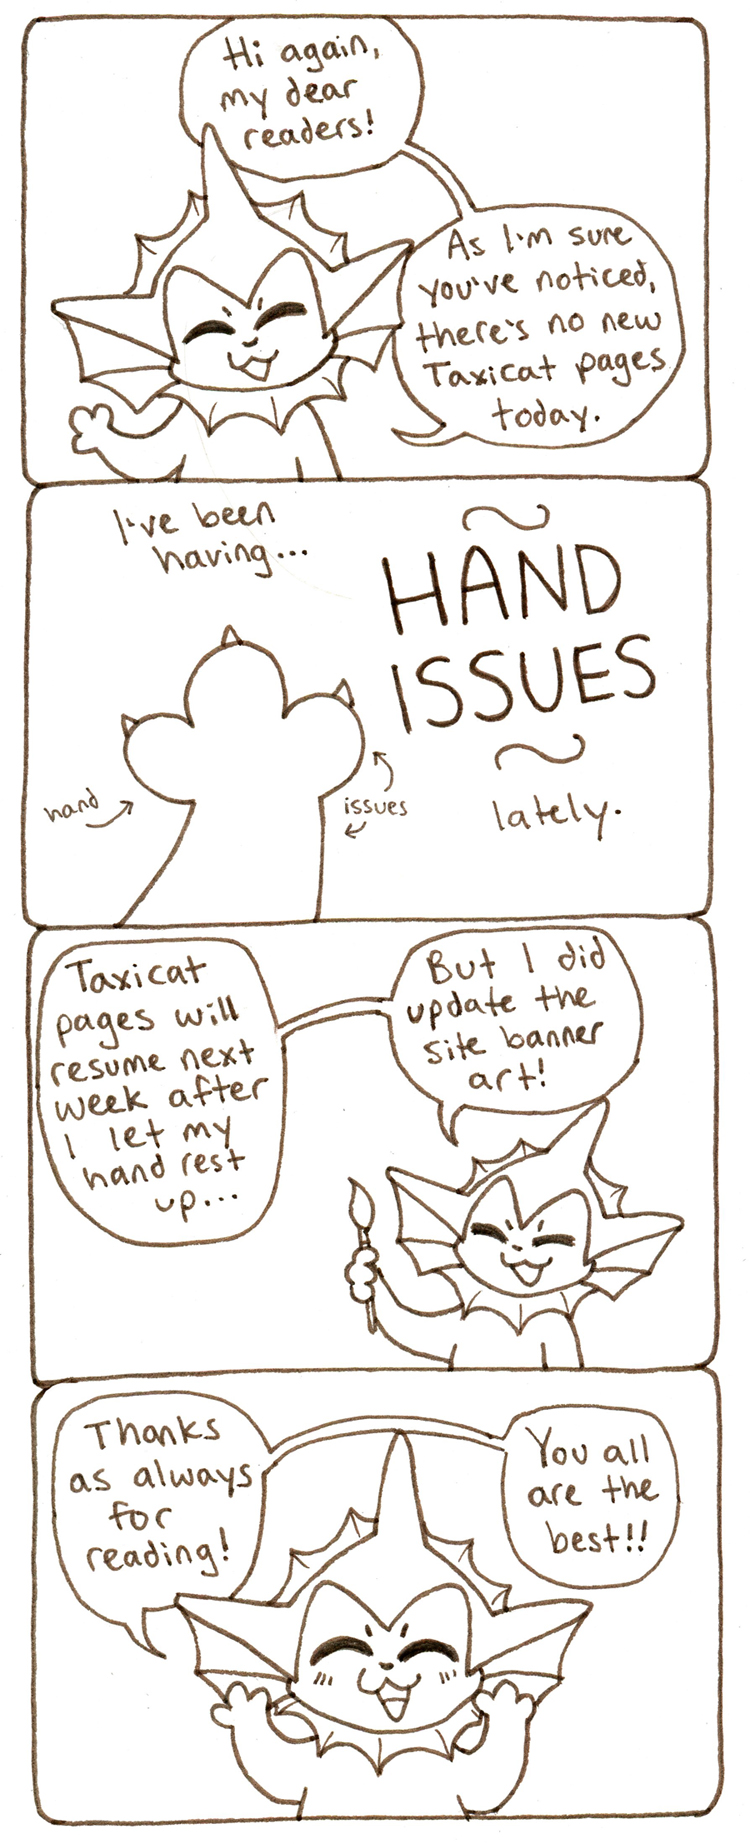 Its hard to draw comics when you only have 3 fingers.